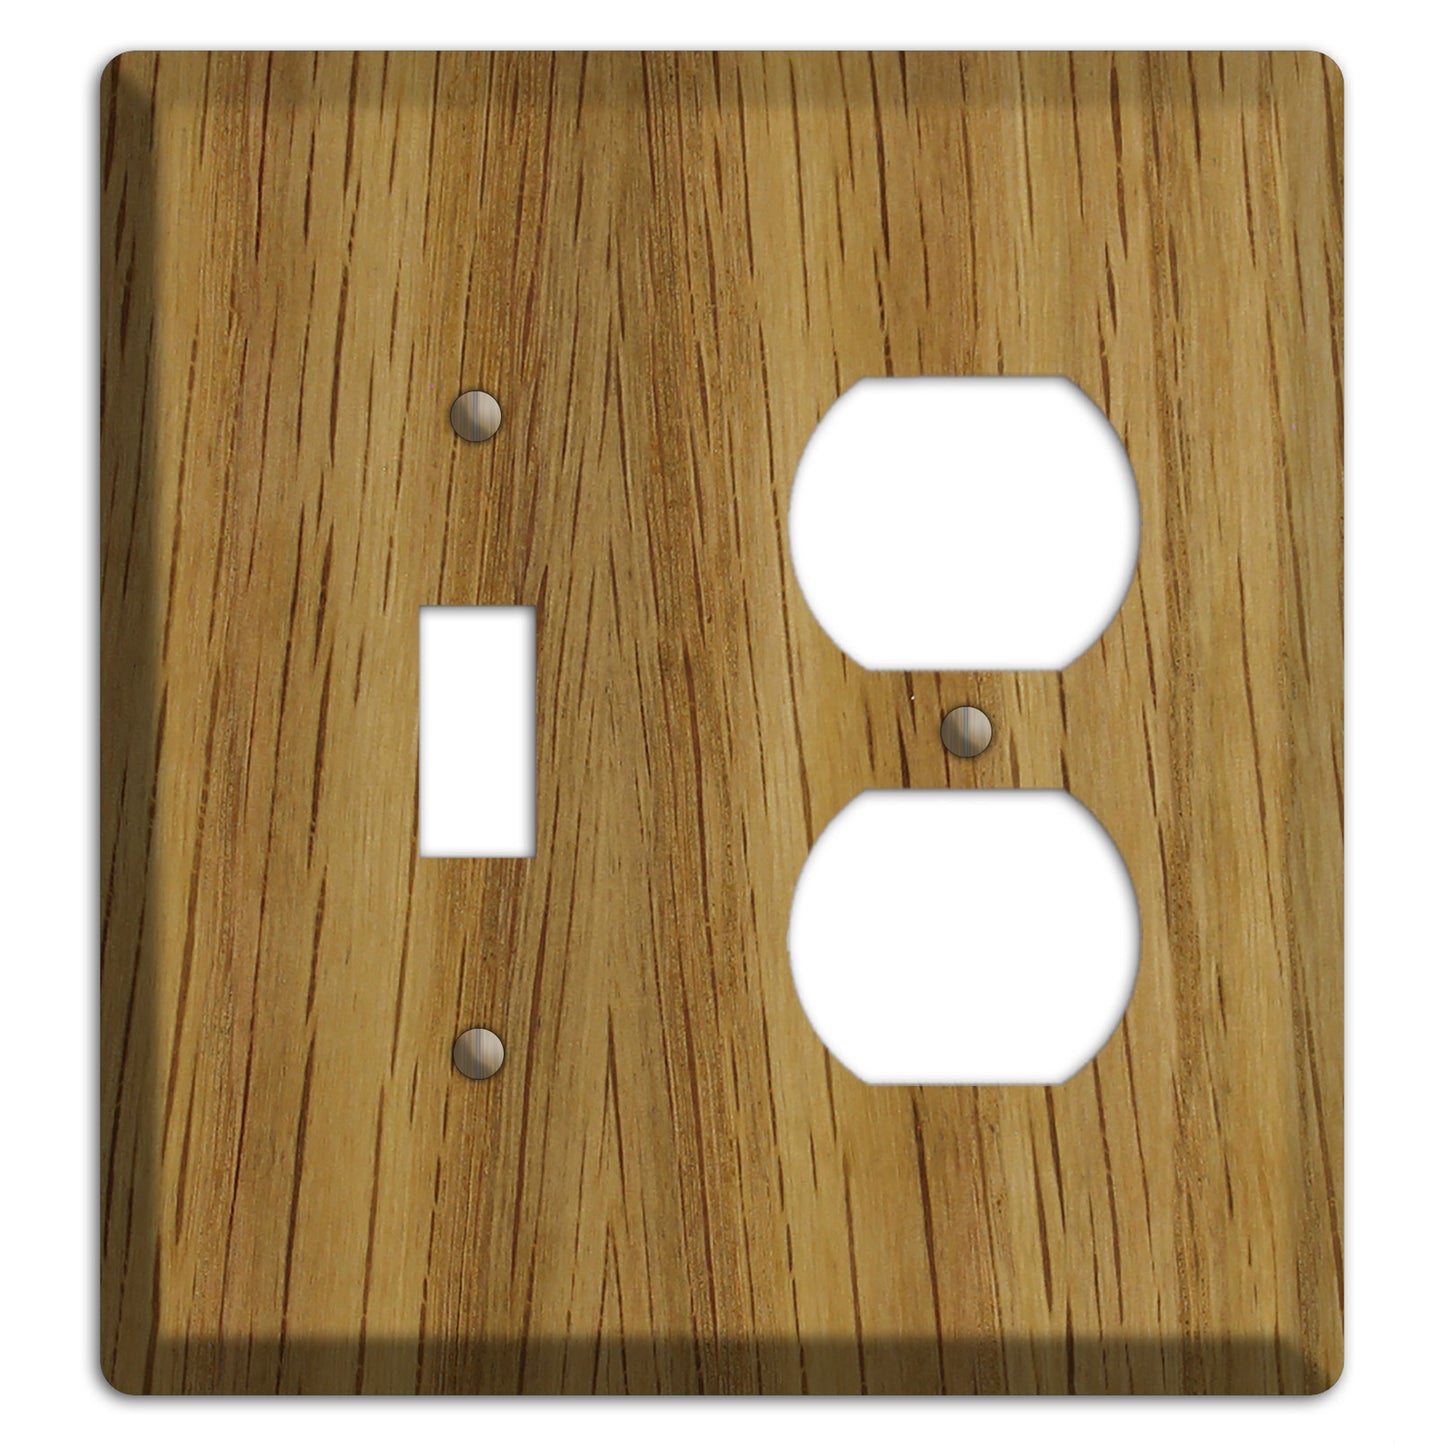 Unfinished White Oak Wood Toggle / Duplex Outlet Cover Plate